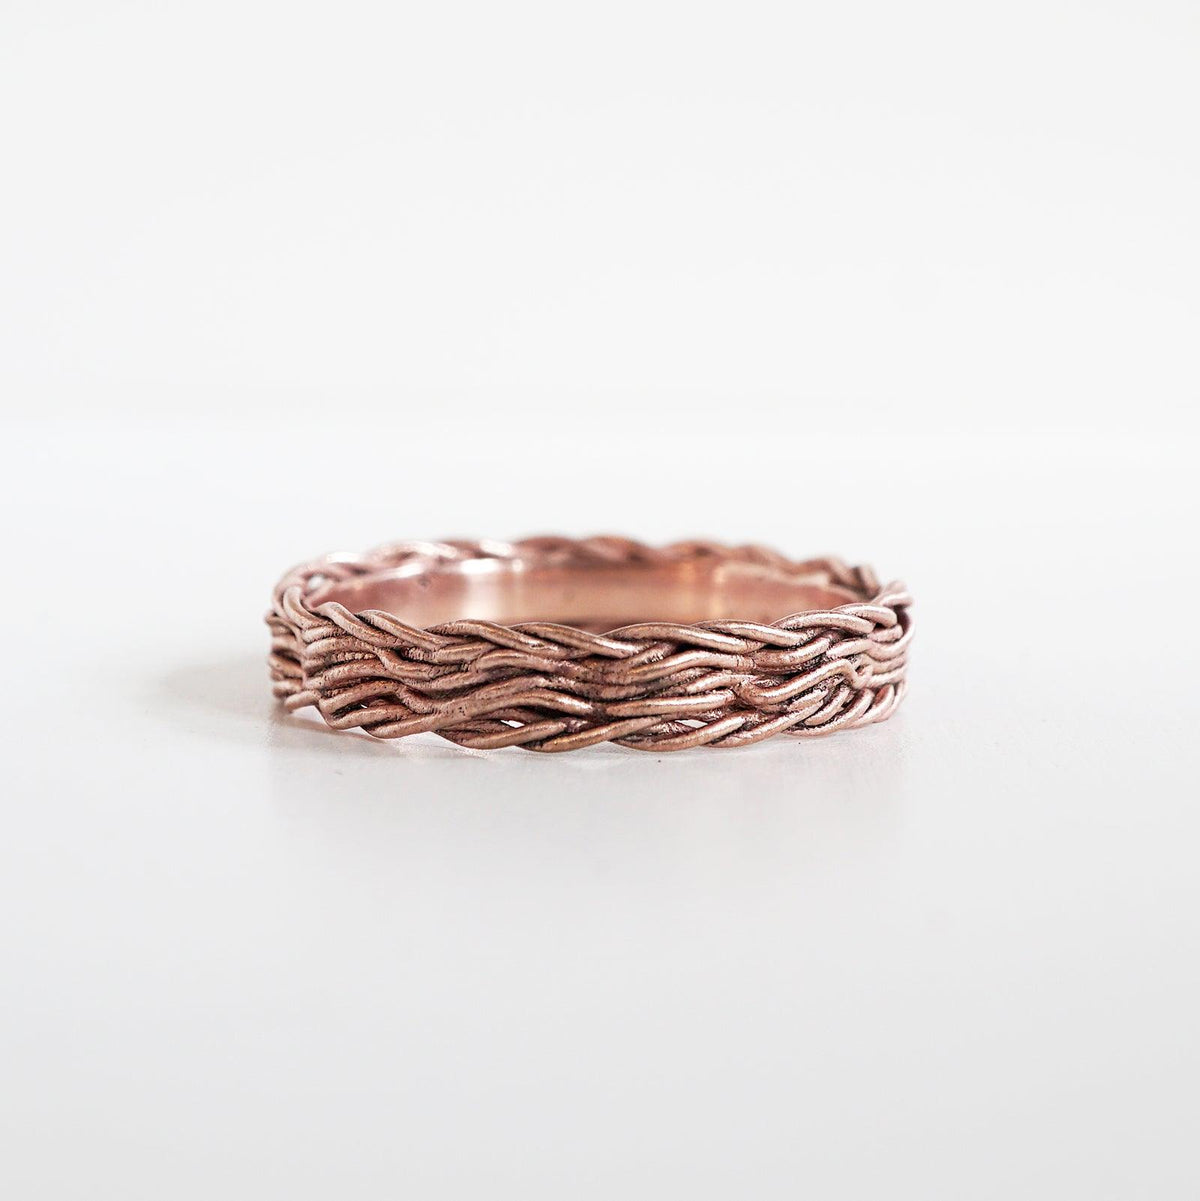 Intertwined Ring Band in 14K Gold, 3mm